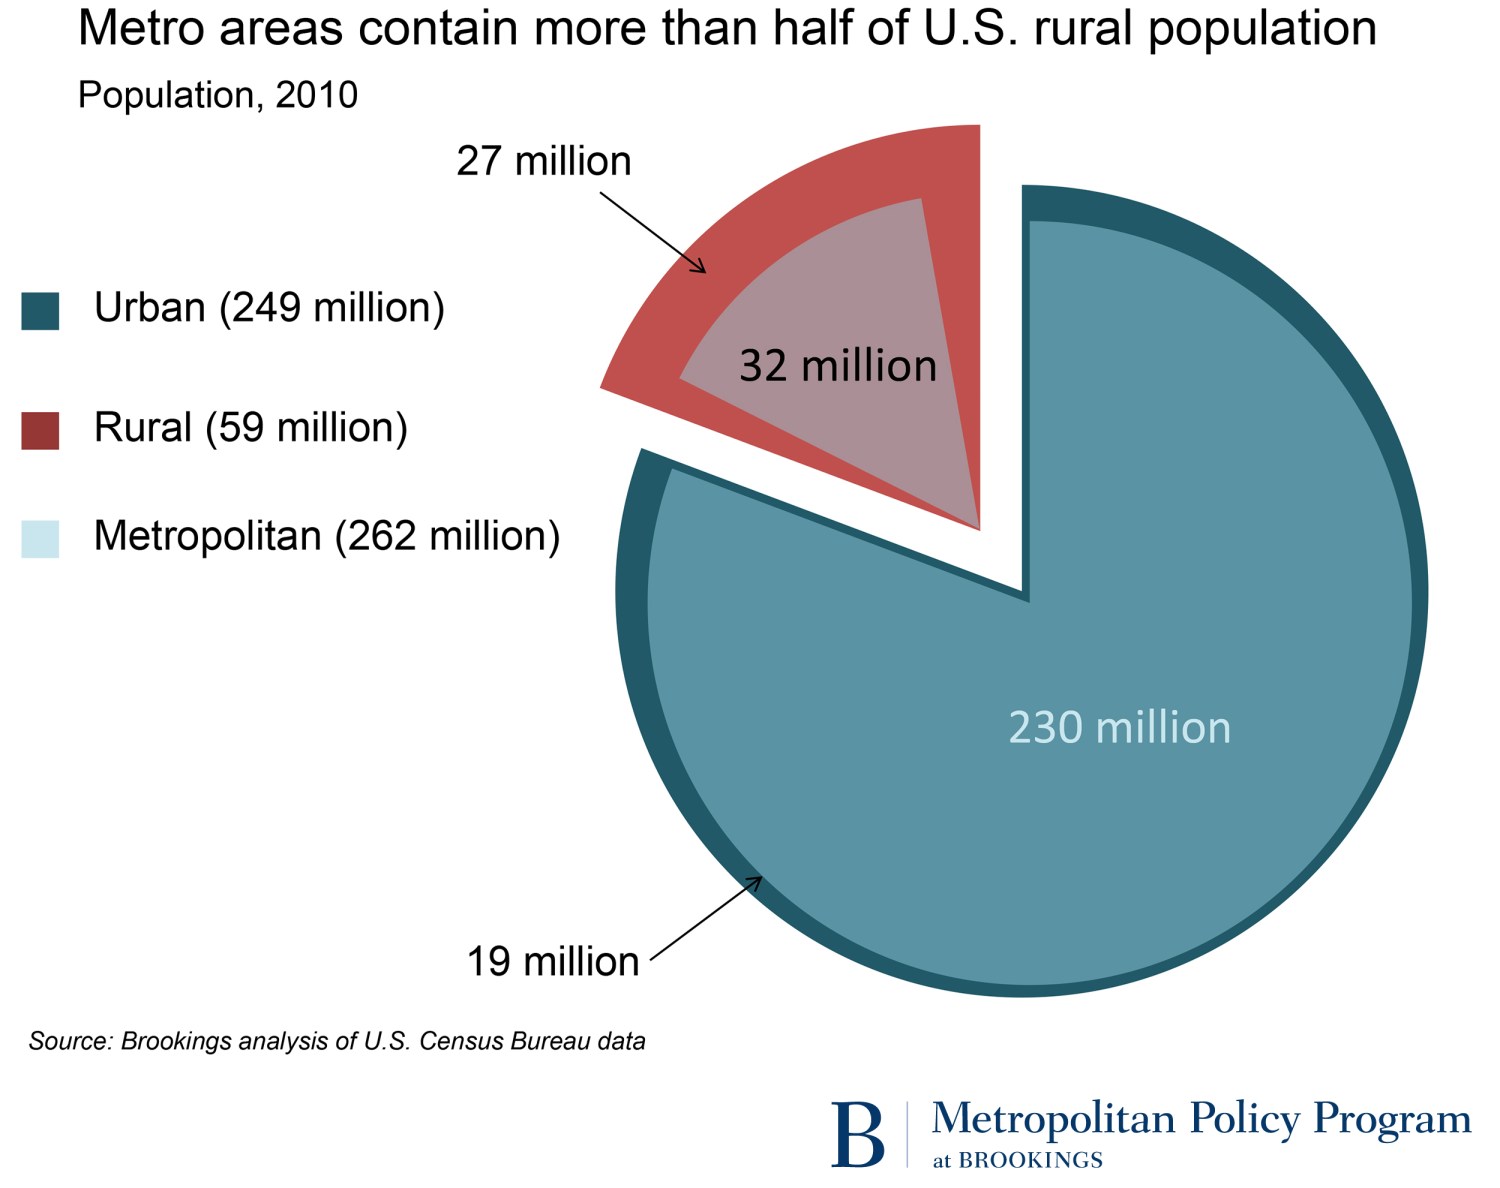 Metro areas contain more than half of U.S. rural population